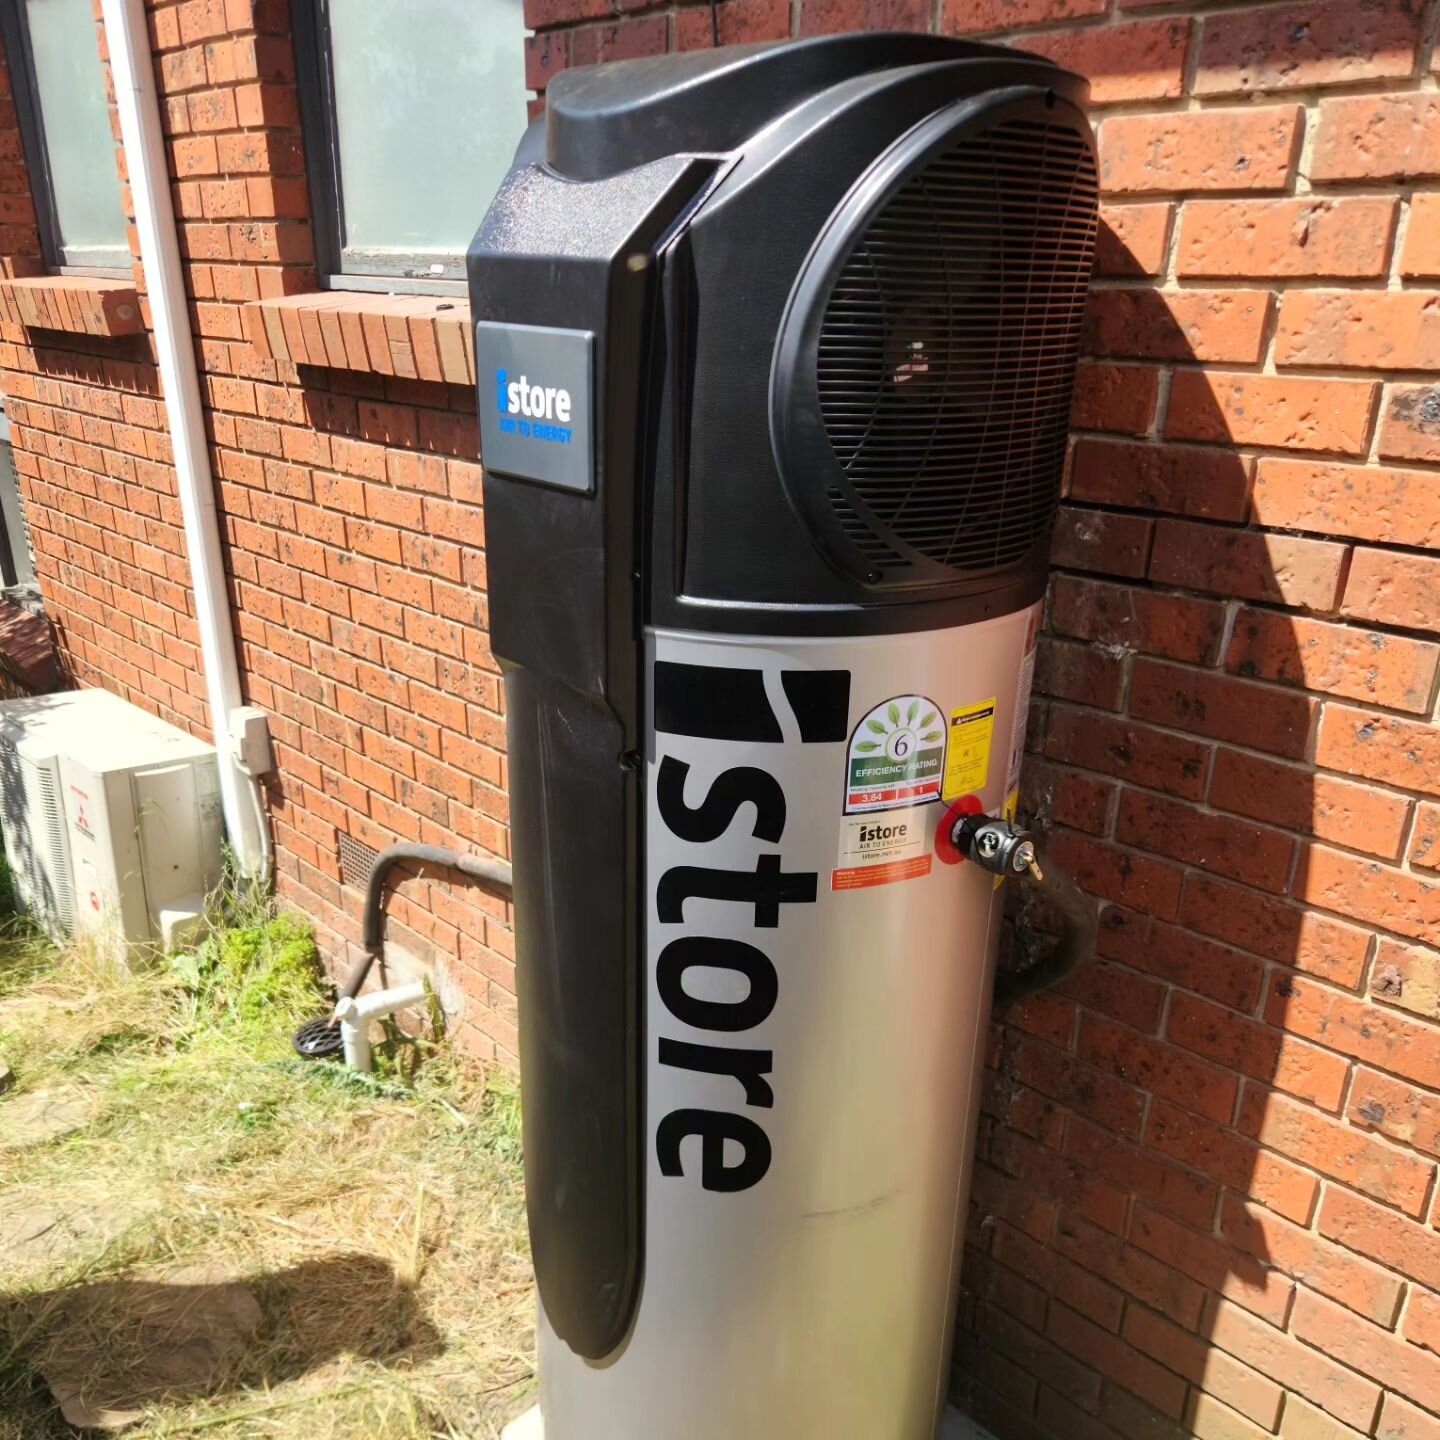 Looking for a way to save on your gas bills? Ask us about the @istoreairtoenergy heat pump. Save up to $1000+ on gas bills and government rebates available. There's no time like today!